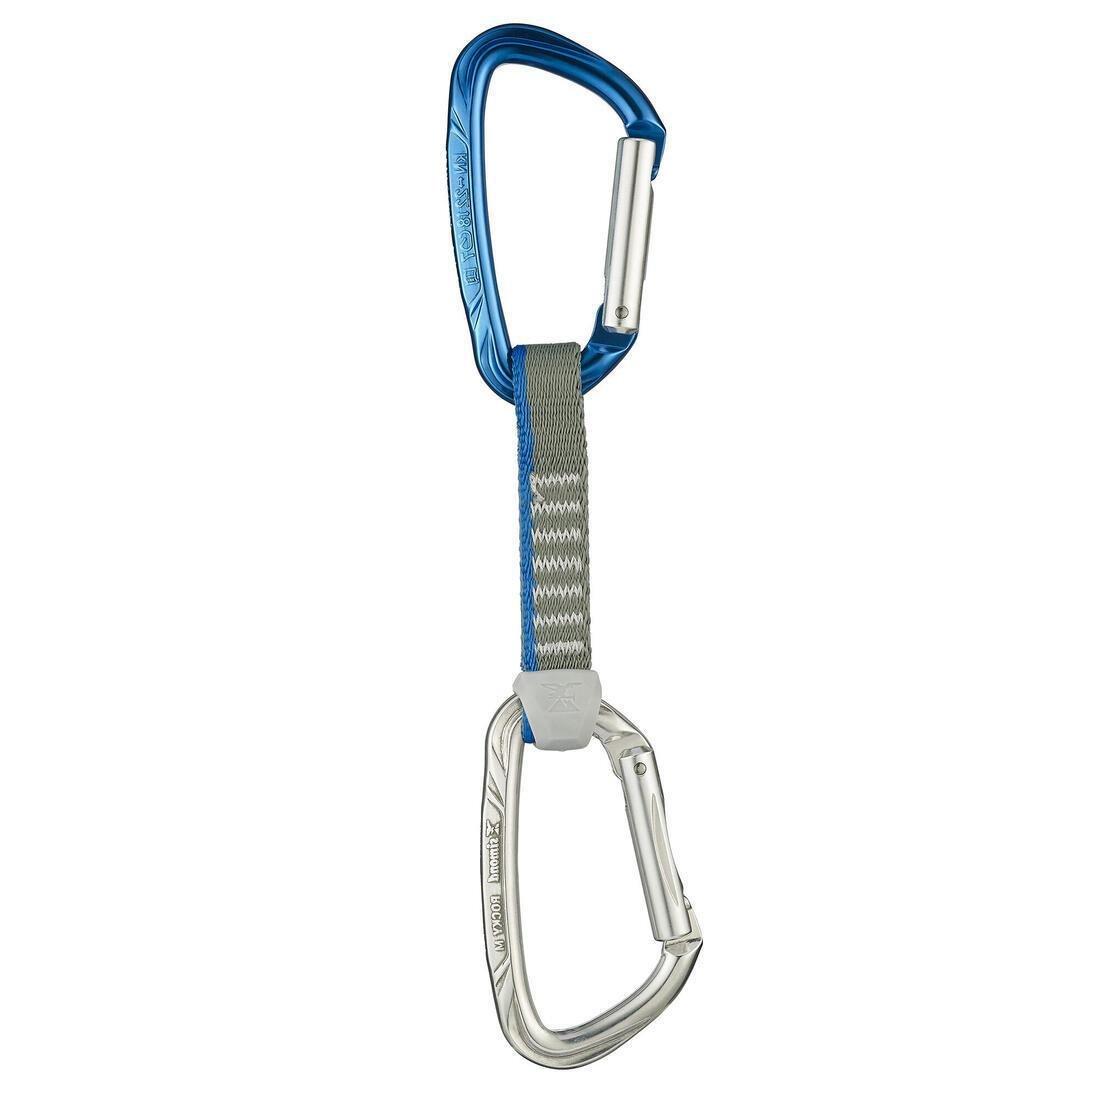 SIMOND - Climbing And Mountaineering Quickdraw - Rocky M 11 Cm - Polished